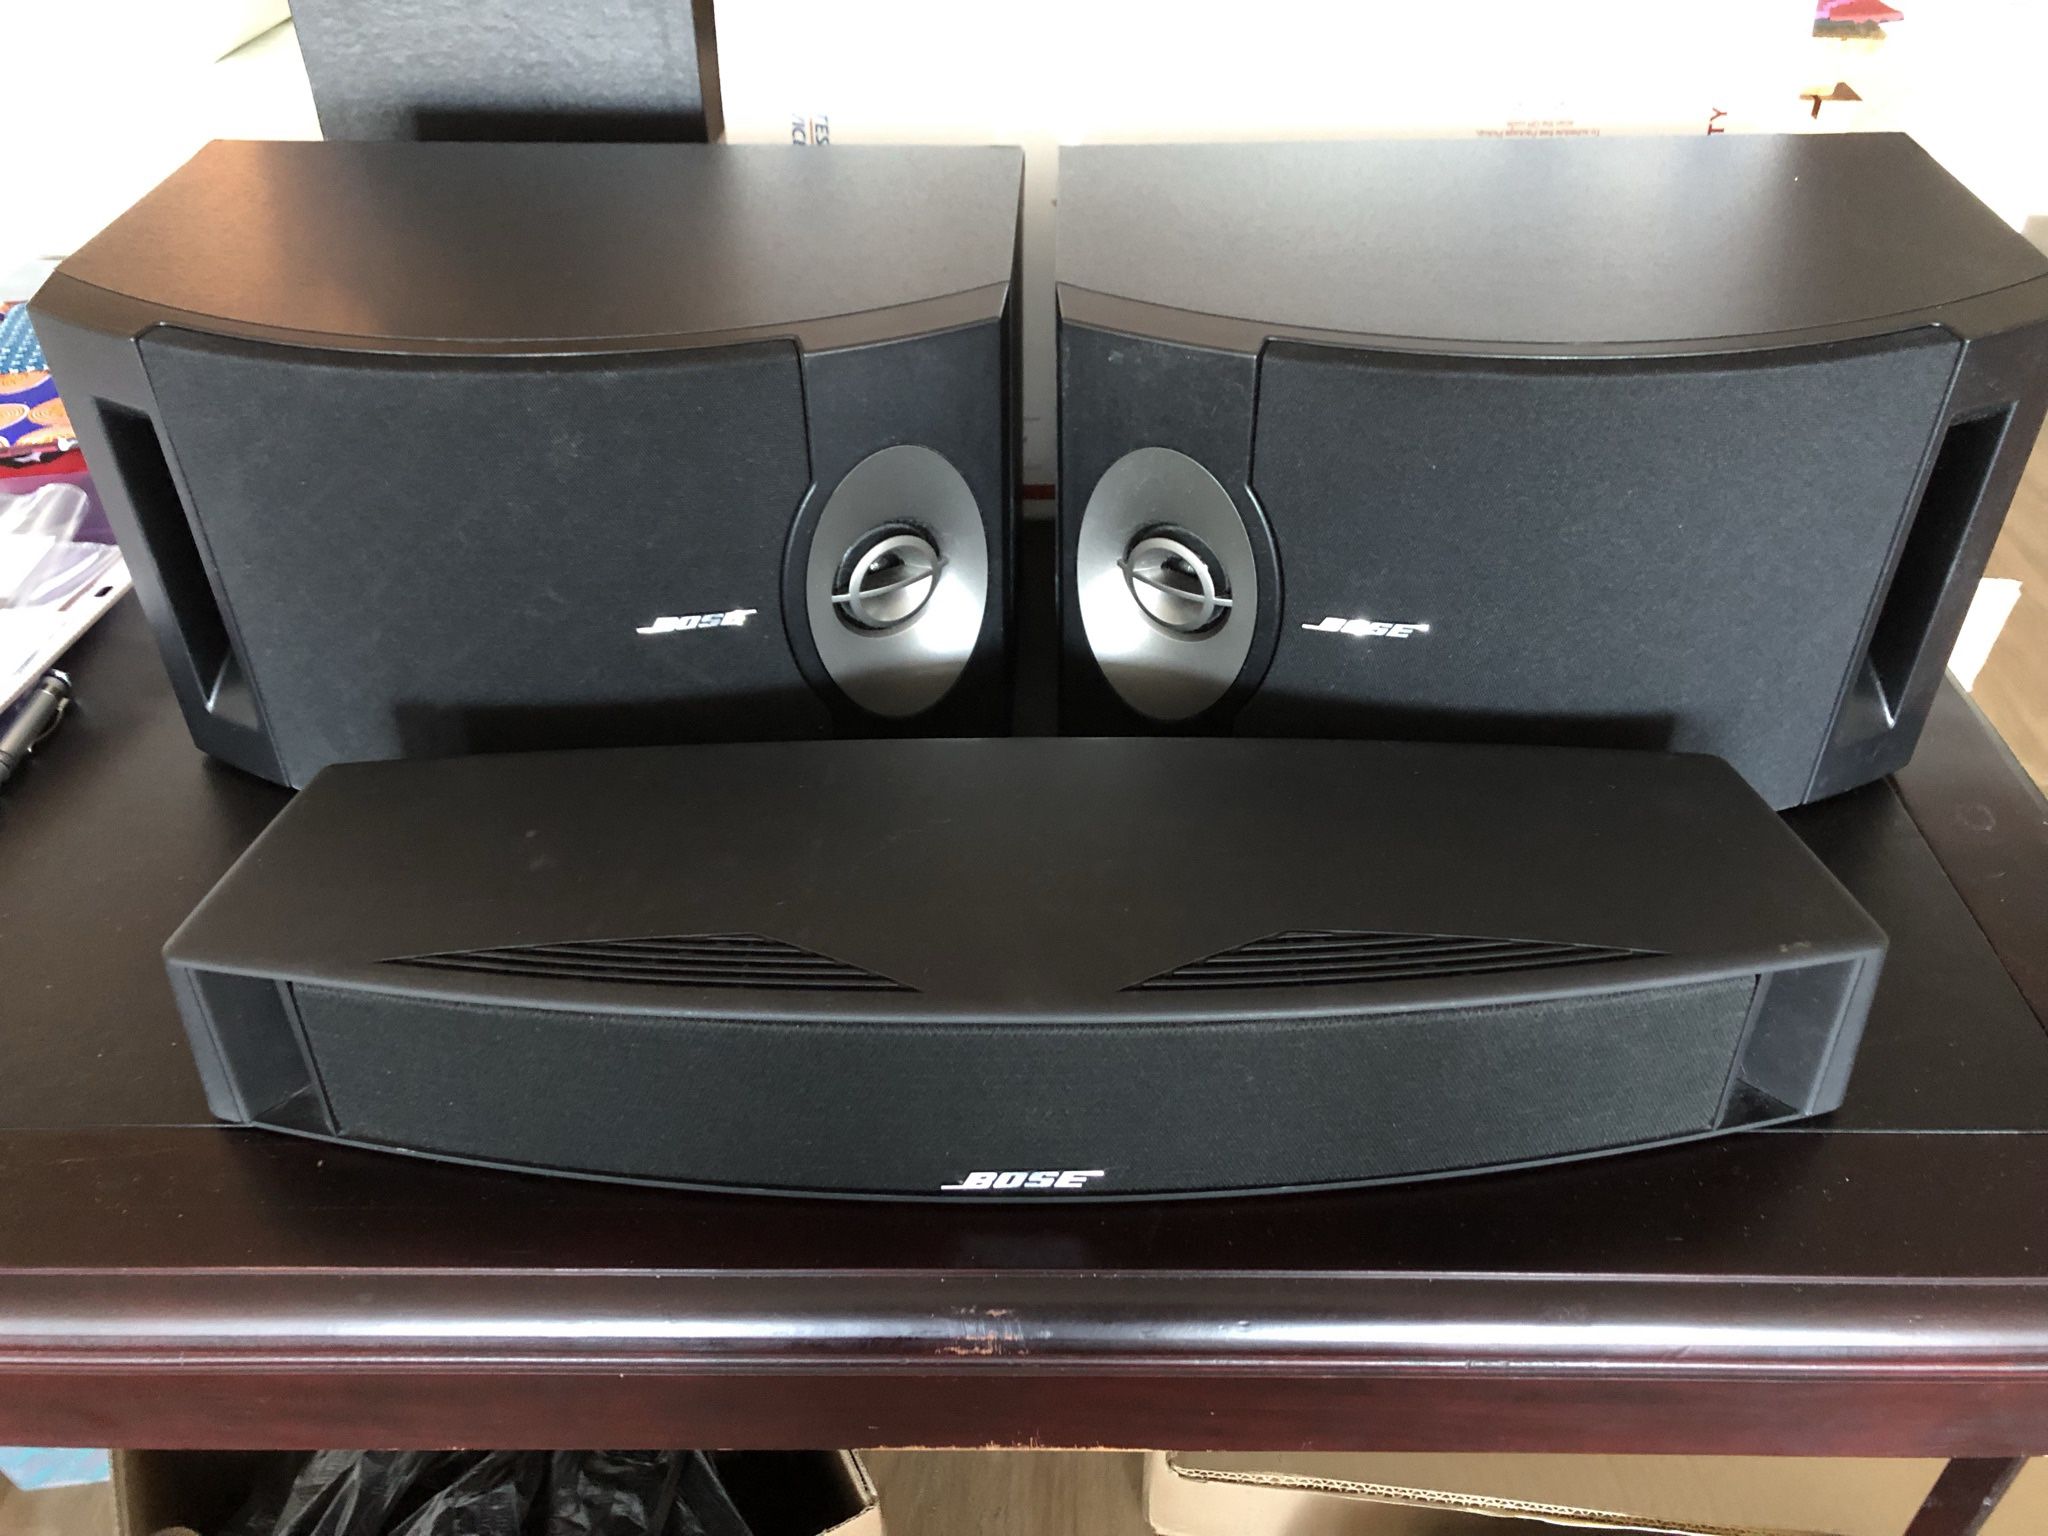 Surround Sound Receiver With Bose Speakers And Polk Subwoofer